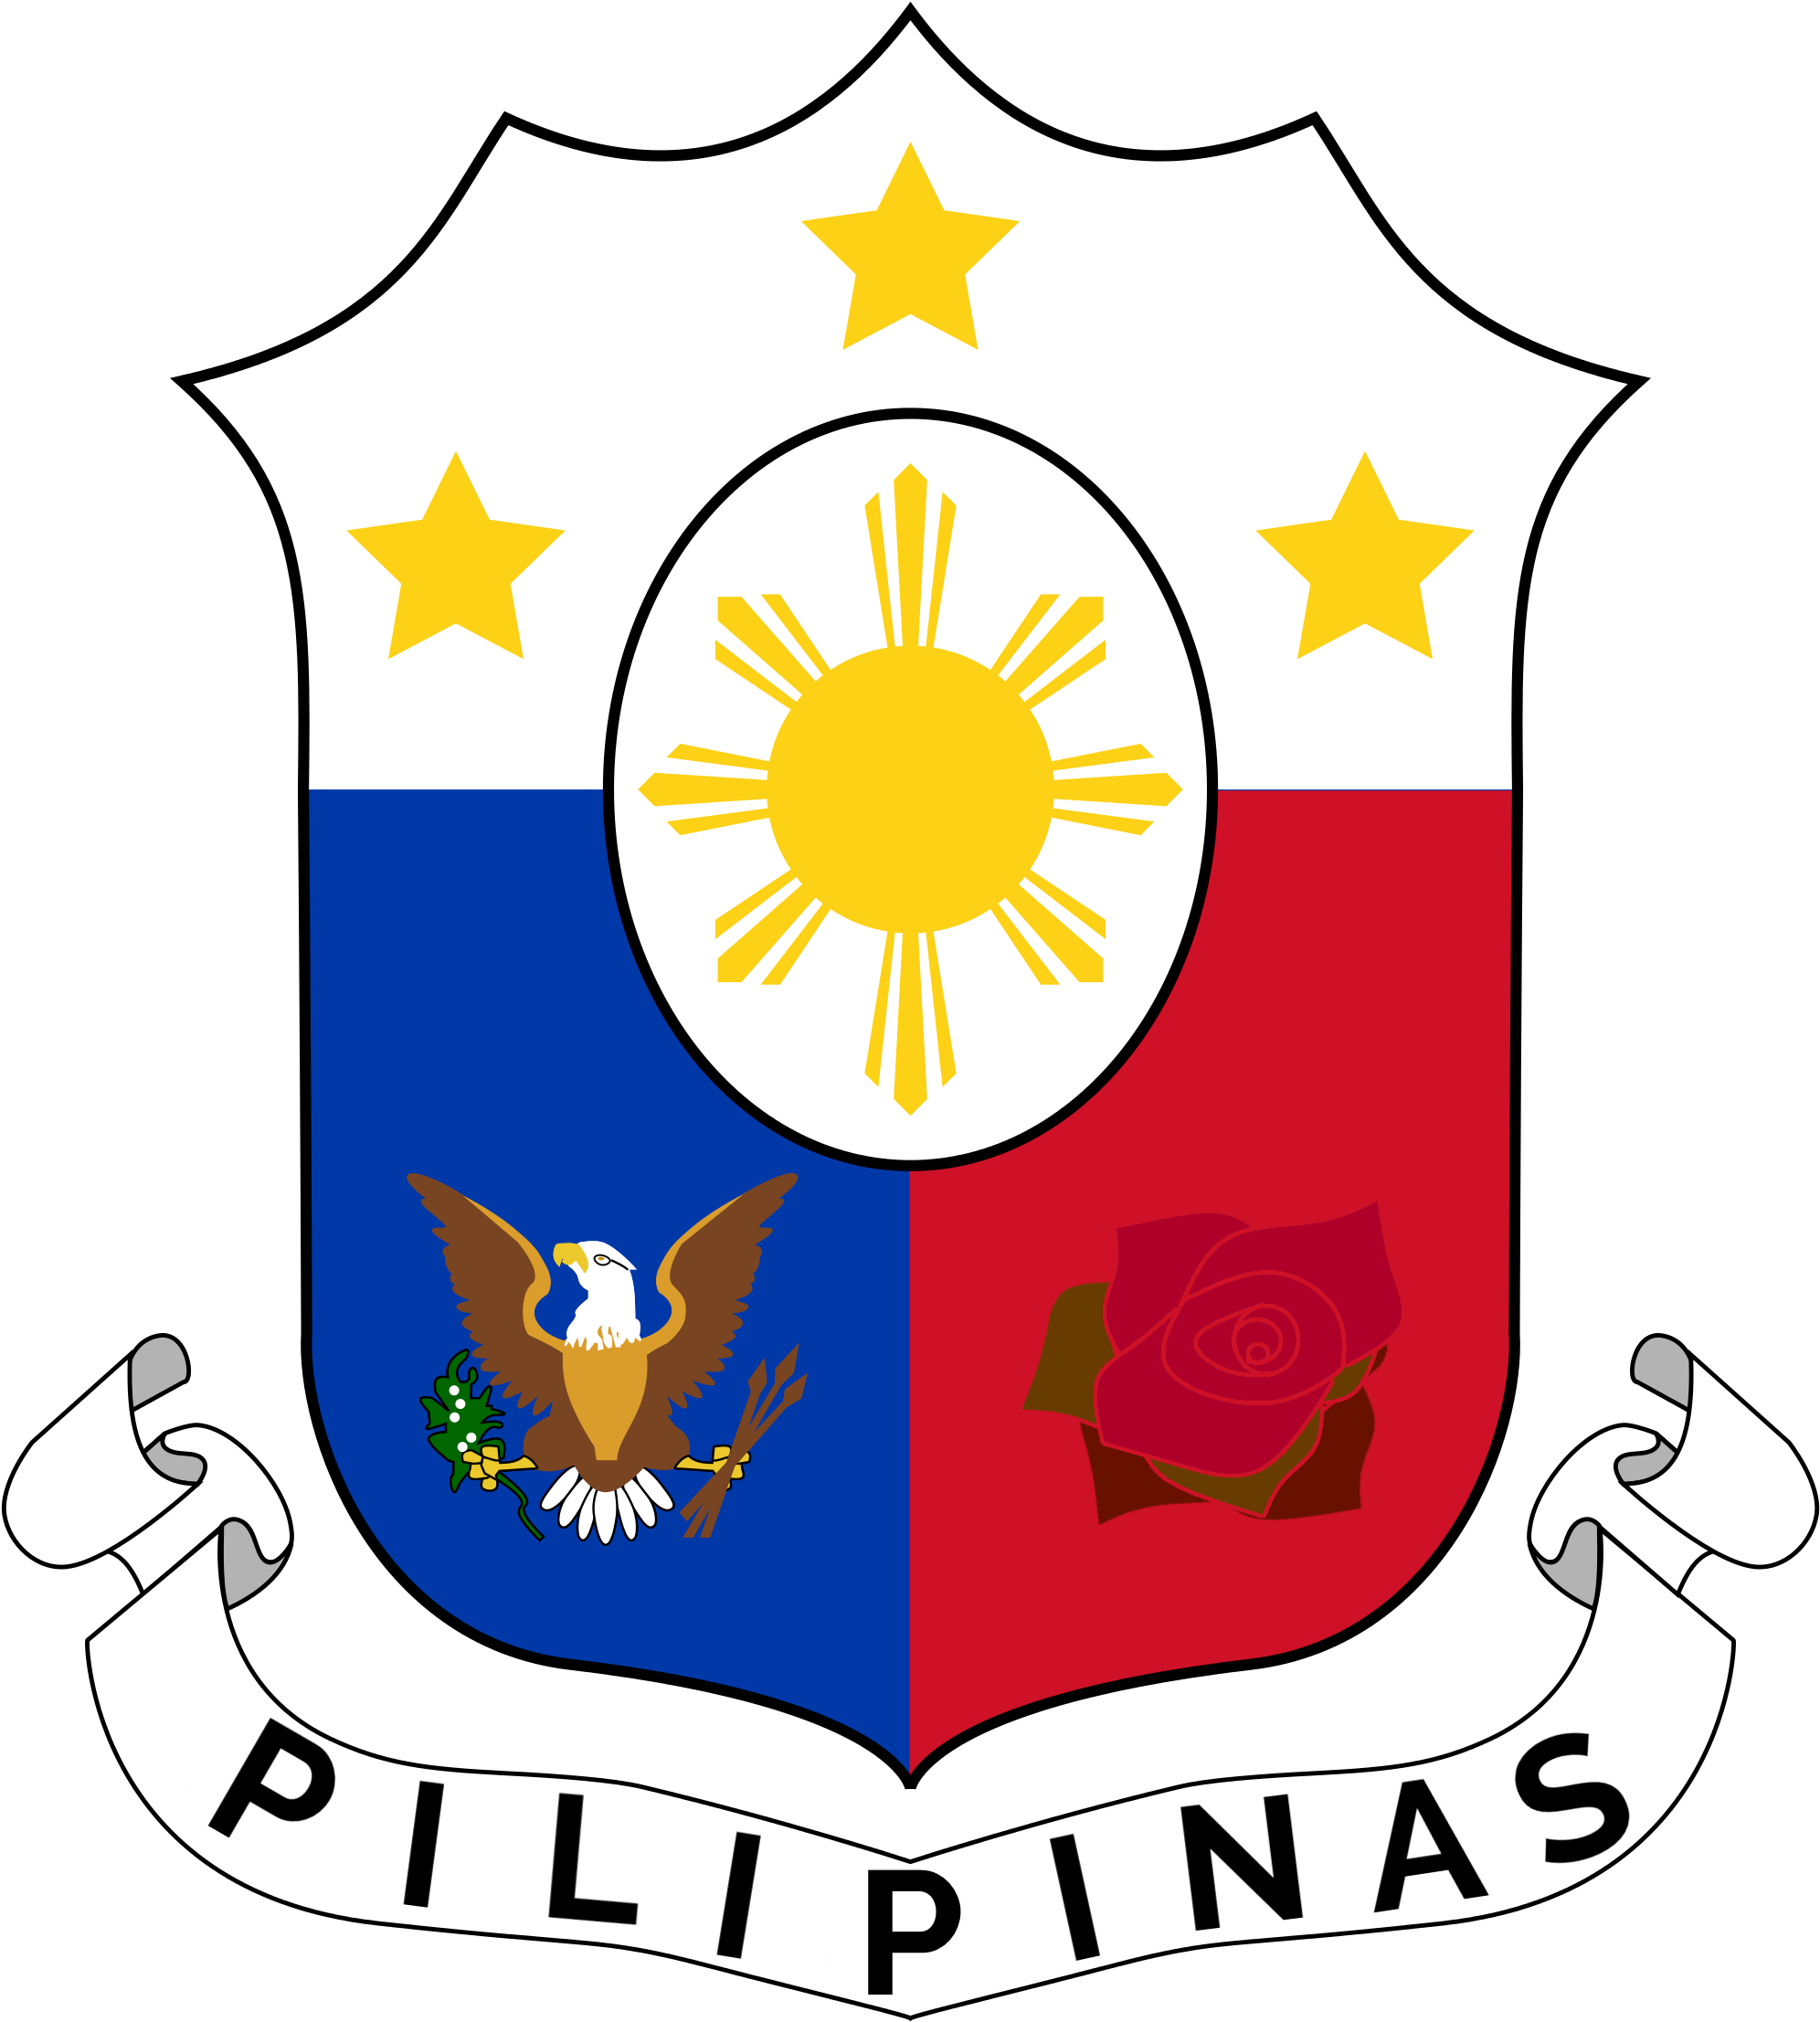 Flag Of The Philippines, Fdr Philippines Coat Of Arms - Republic Of The Philippines (2000x2219)